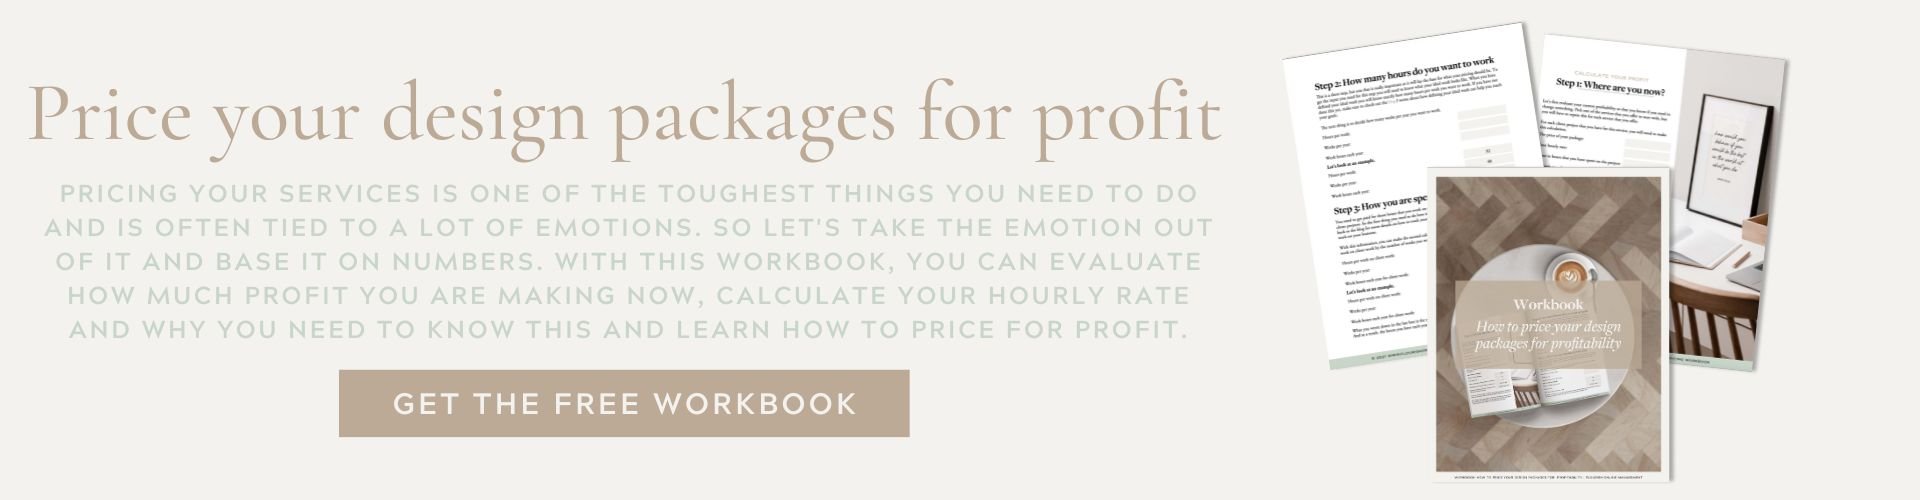 Free Resource - Price your design packages for profit by Flourish Online Management - Sand Background.jpg (Copy)